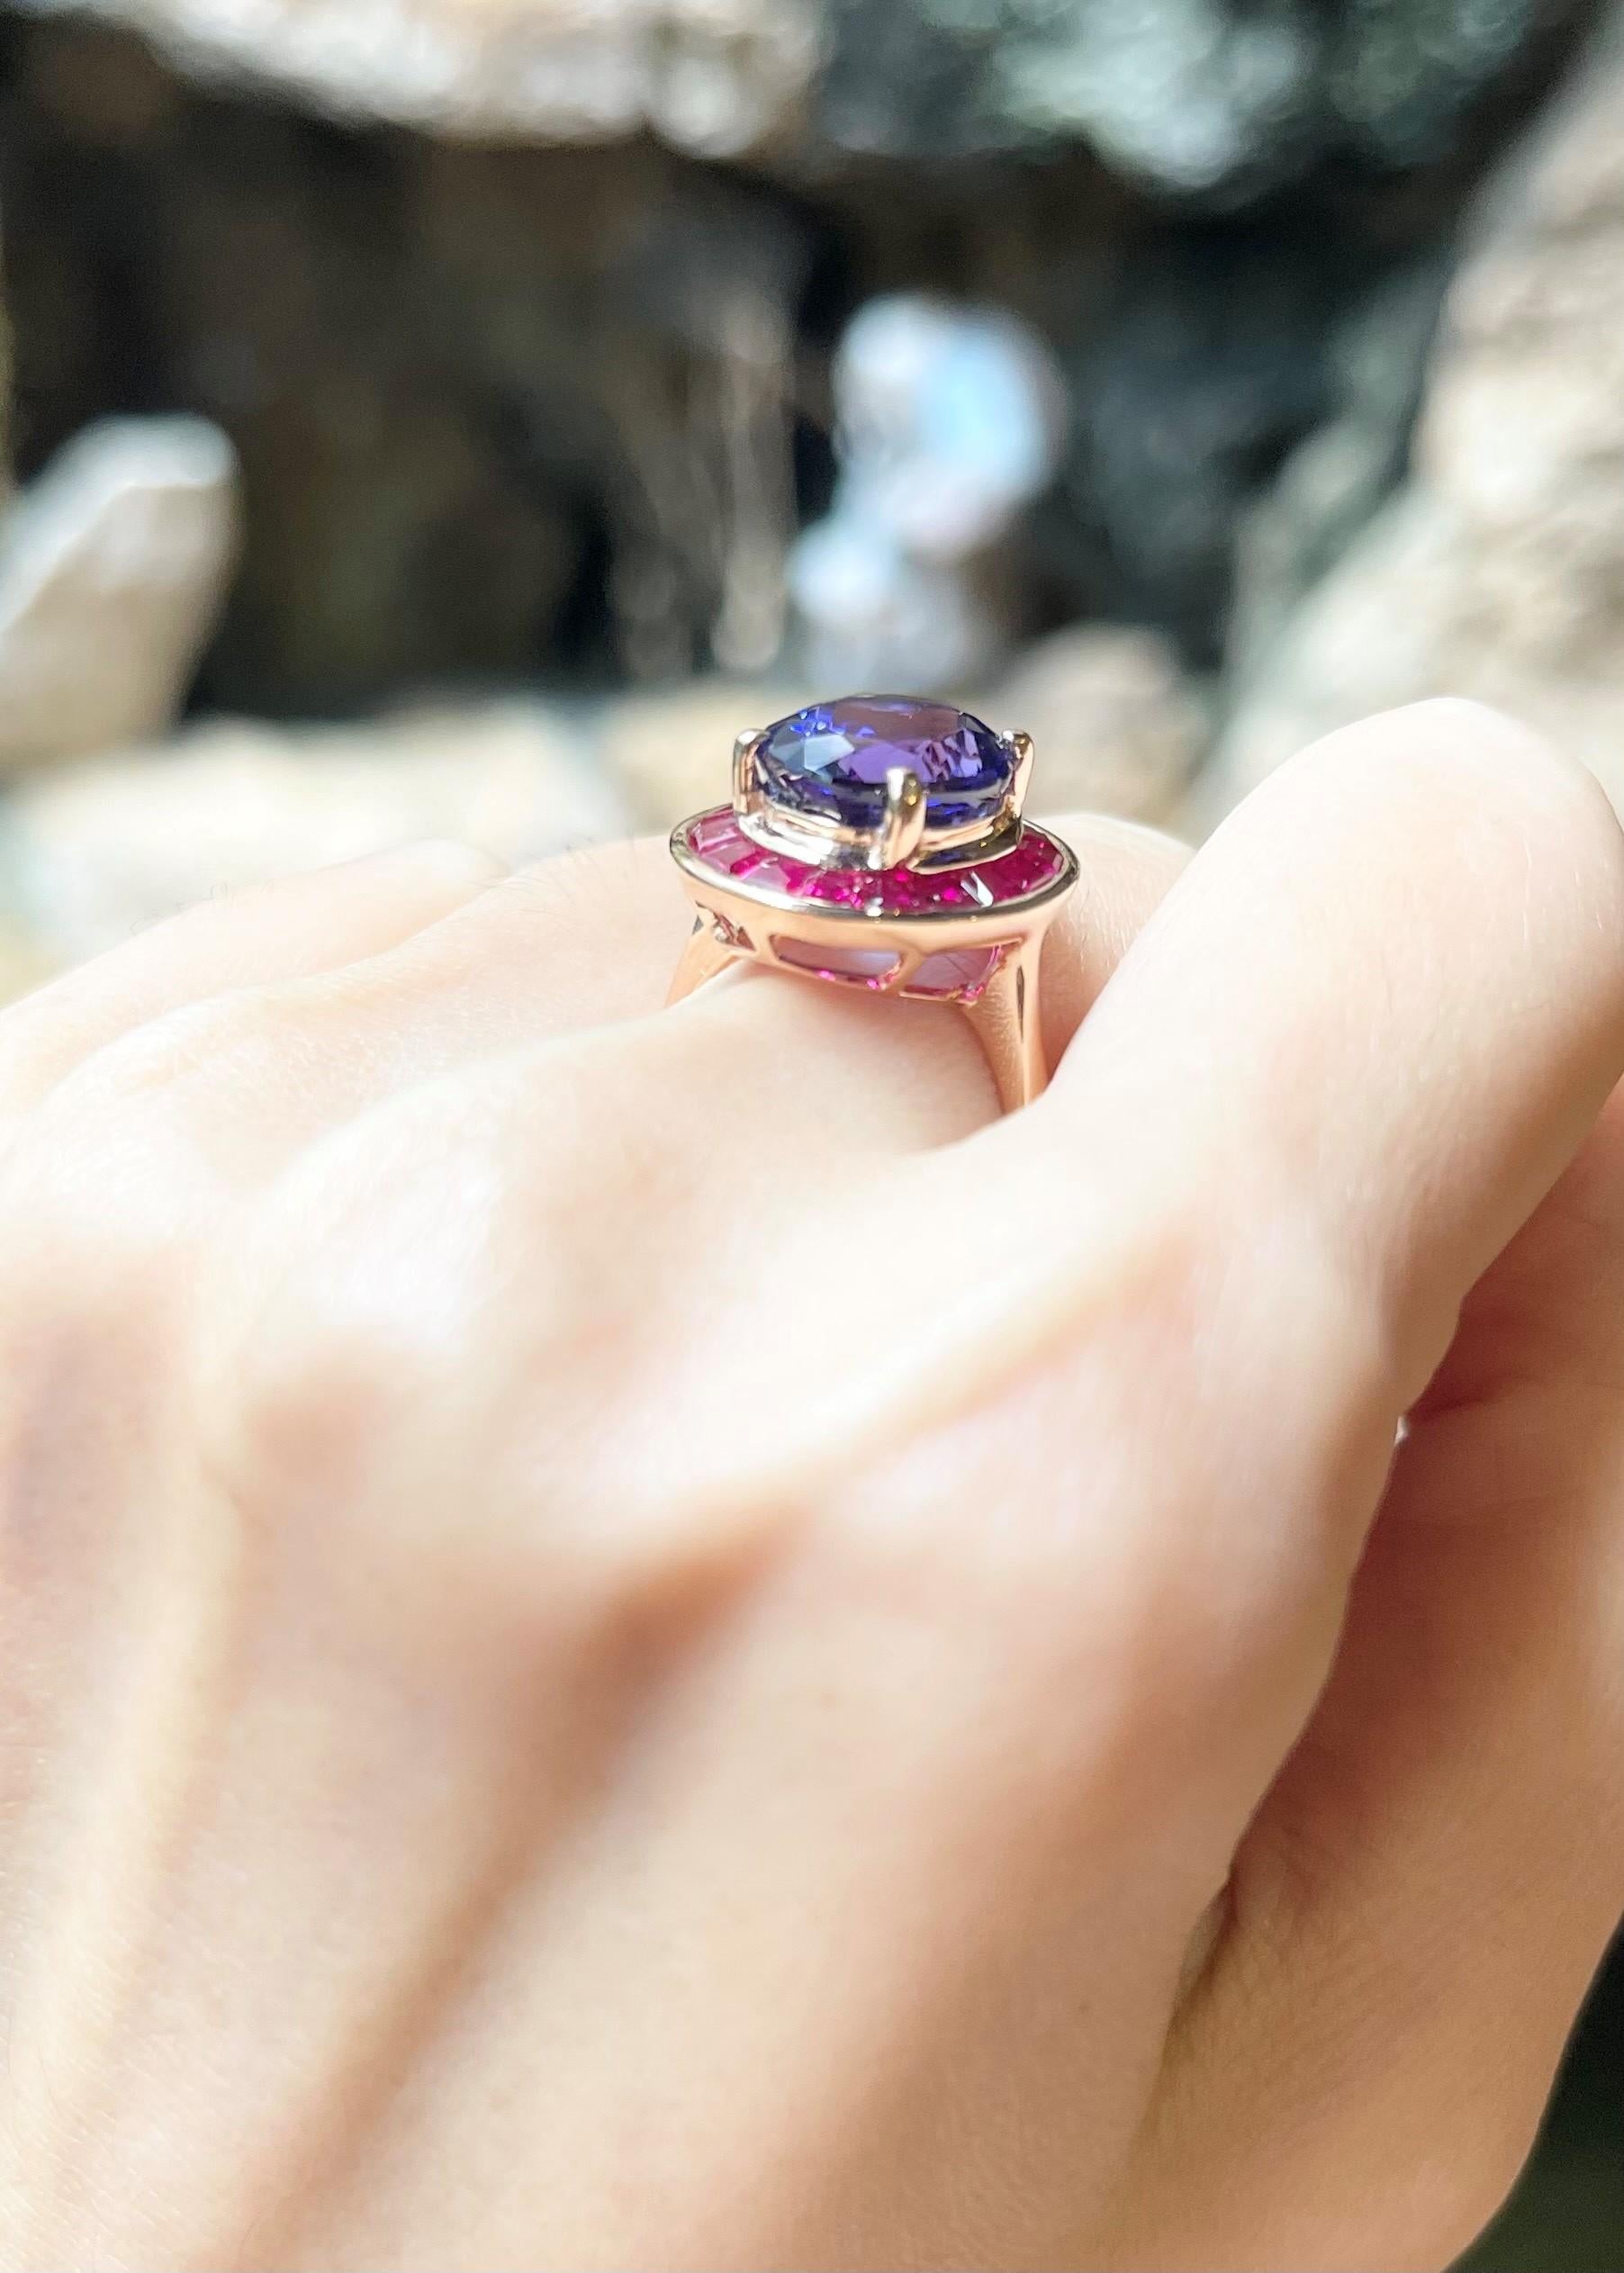 Tanzanite 6.17 carats with Ruby 2.10 carats Ring set in 18K Rose Gold Settings

Width:  1.5 cm 
Length: 1.8 cm
Ring Size: 54
Total Weight: 7.47 grams

